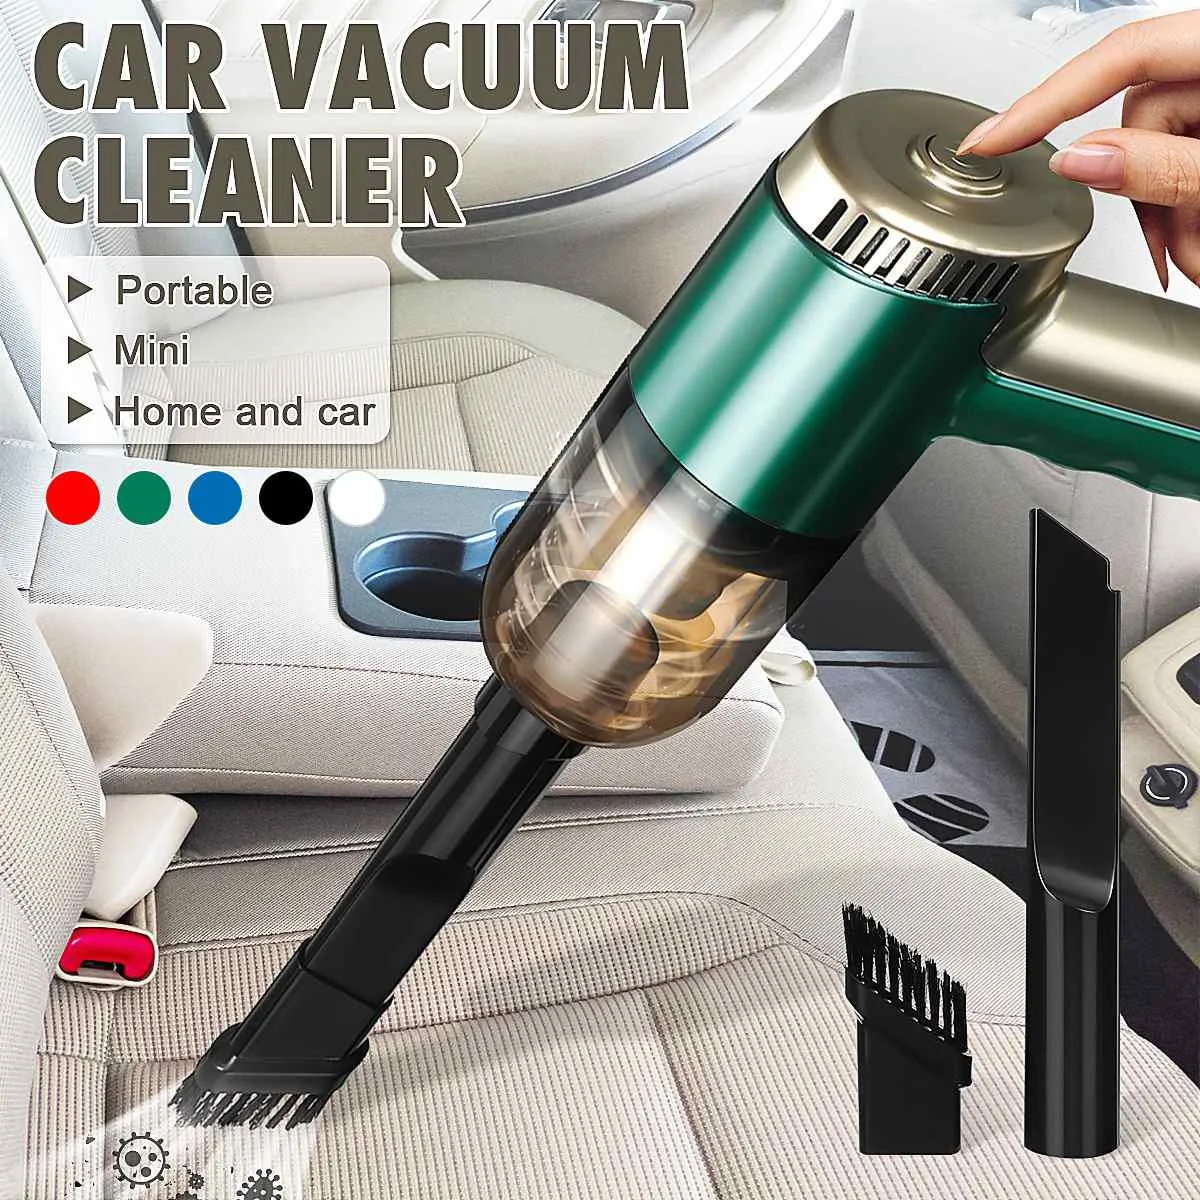 Car Wireless Vacuum Cleaner 9000PA Powerful Cyclone Suction Home Portable Handheld Vacuum Cleaning Mini Cordless Vacuum Cleaner